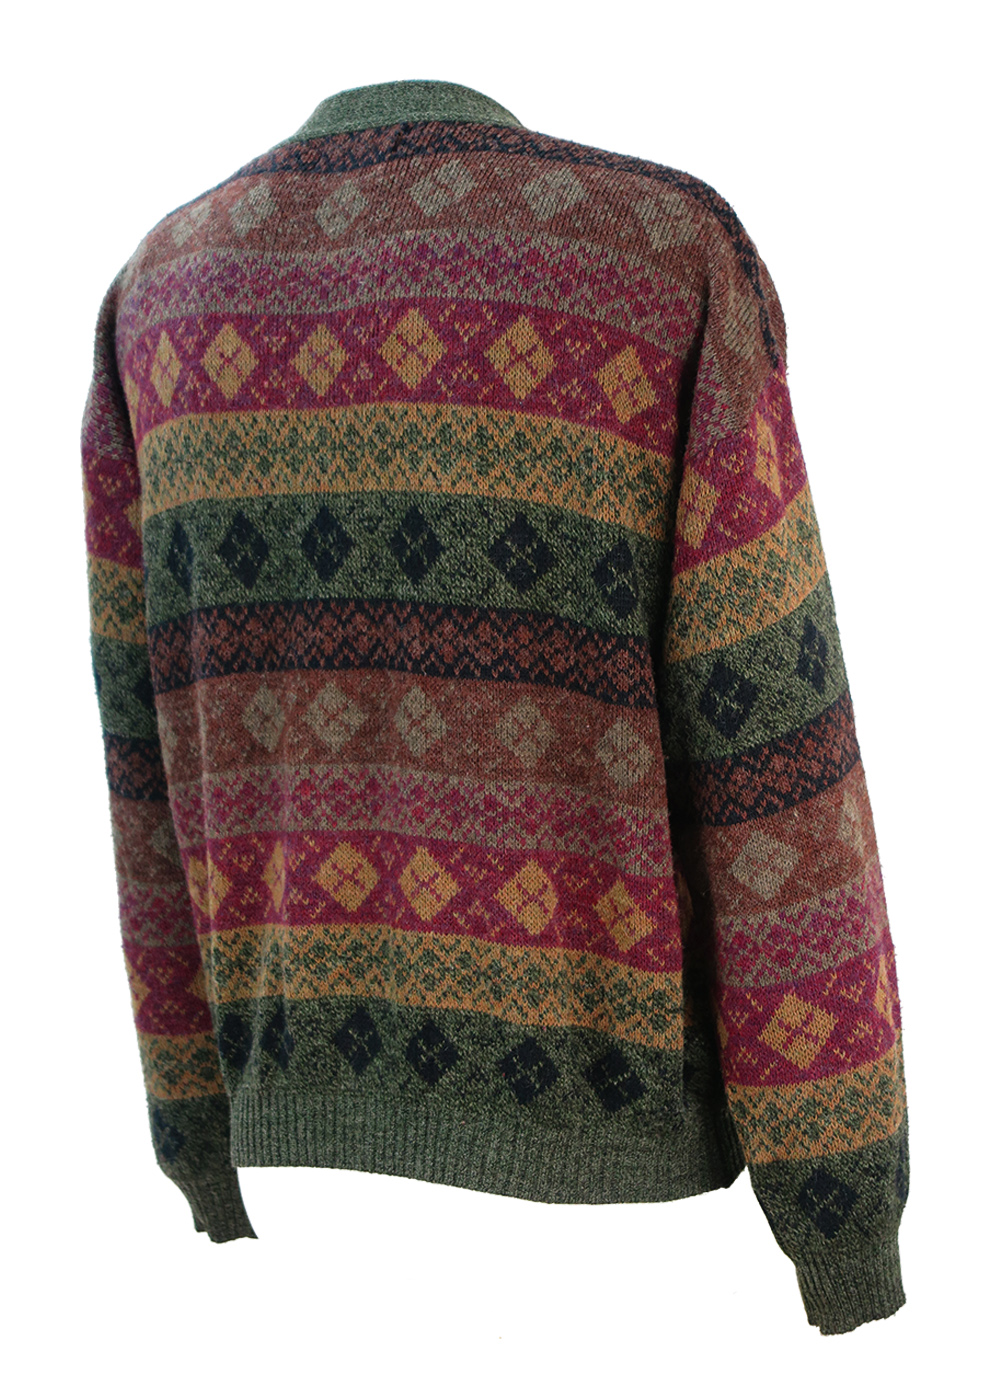 Fair Isle Patterned Cardigan in Burgundy, Brown, Green & Black with ...